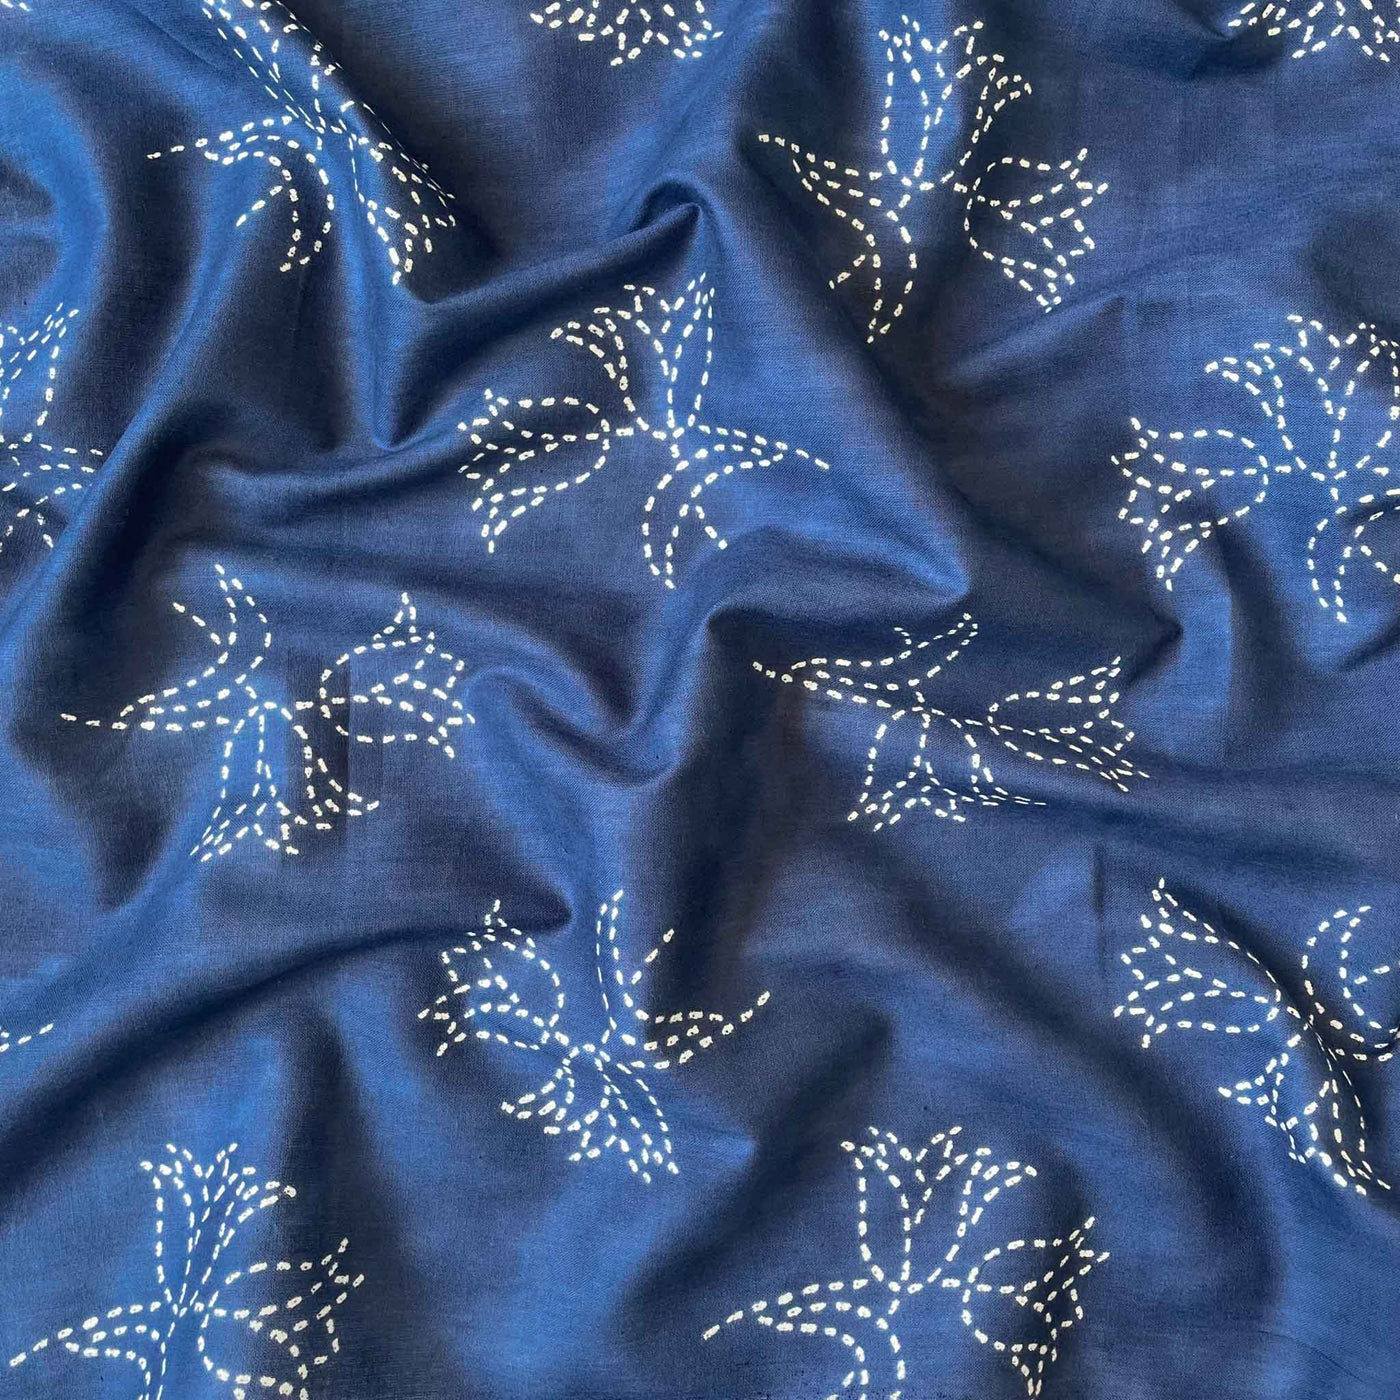 Fabric Pandit Fabric Cloudy Blue and White Roses Hand Block Printed Pure Cotton Fabric (Width 43 inches)